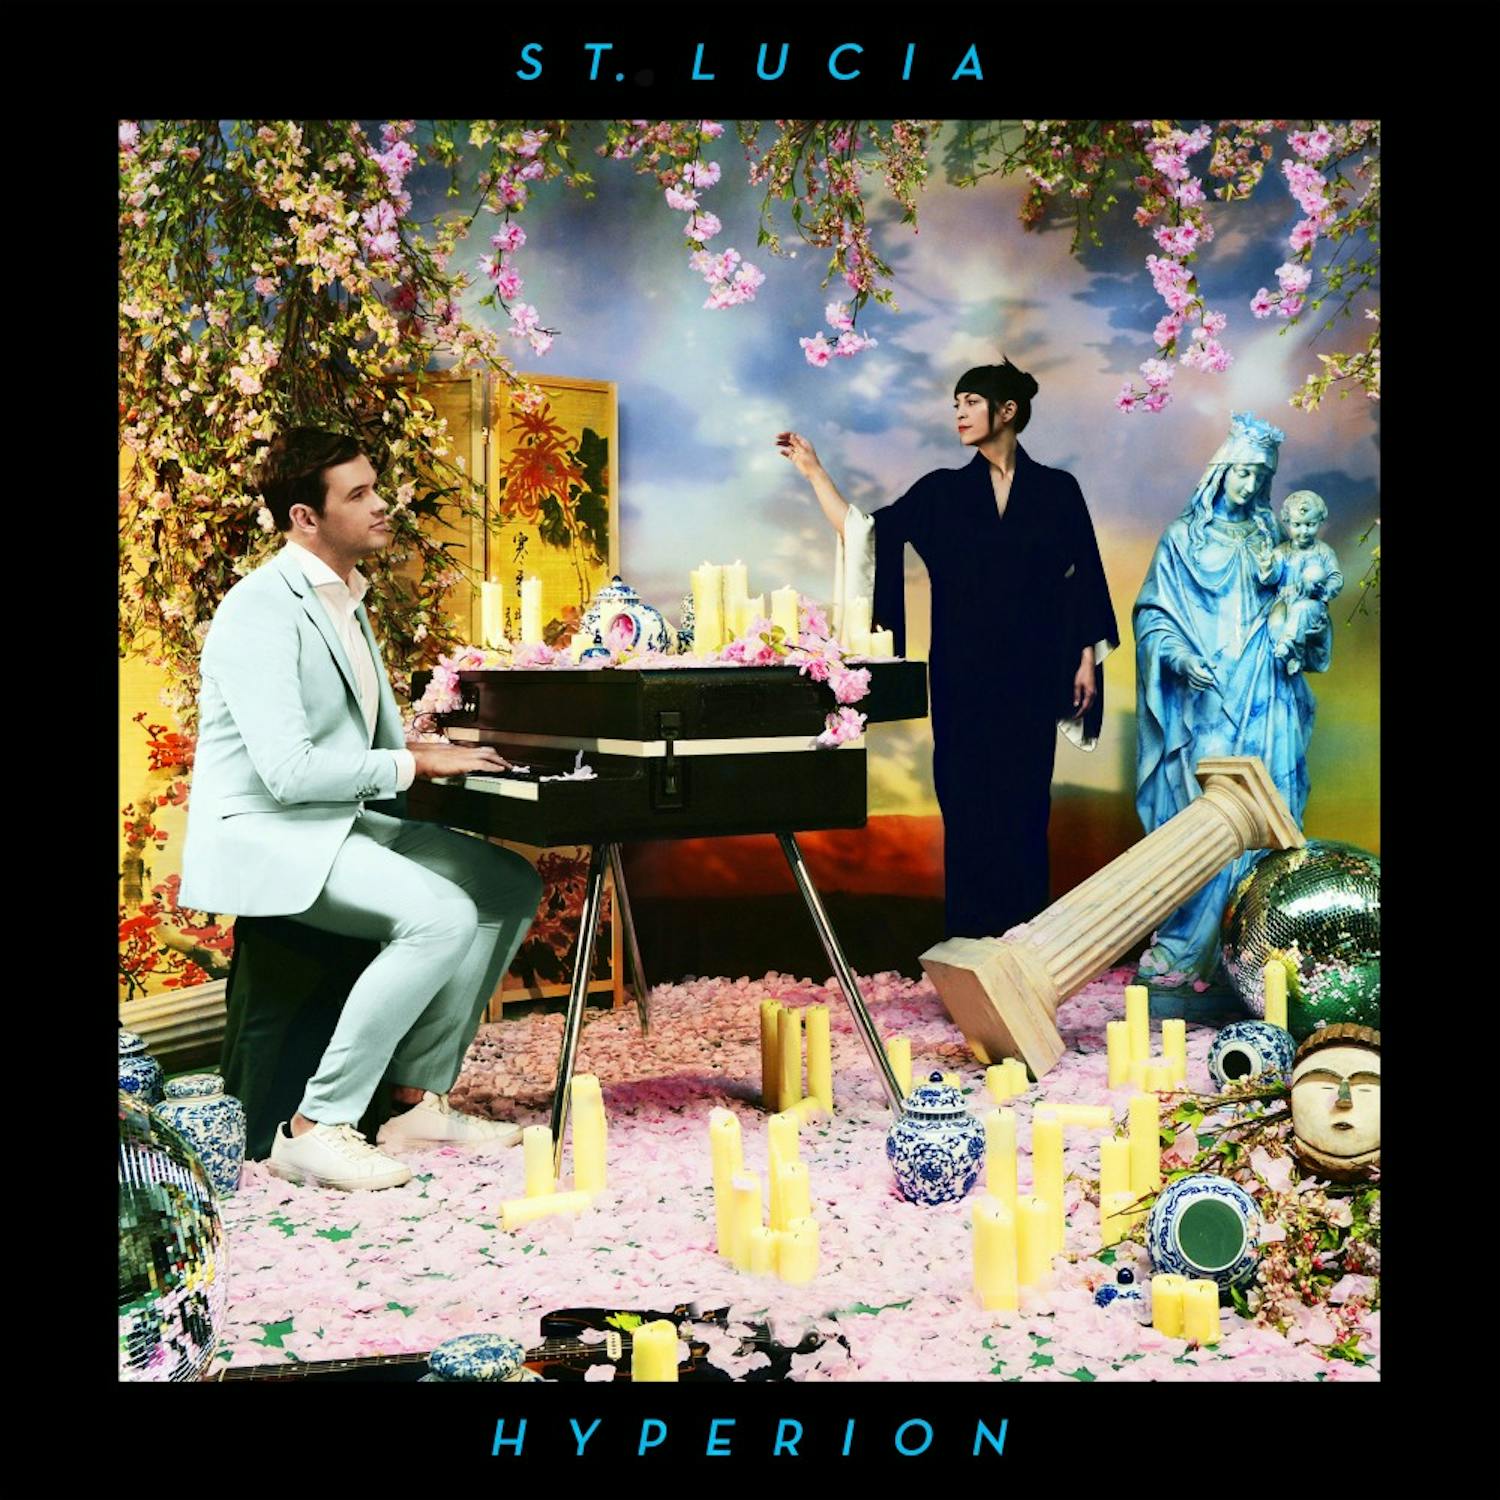 St. Lucia is touring to support their most recent album Hyperion, which was just released two weeks ago.